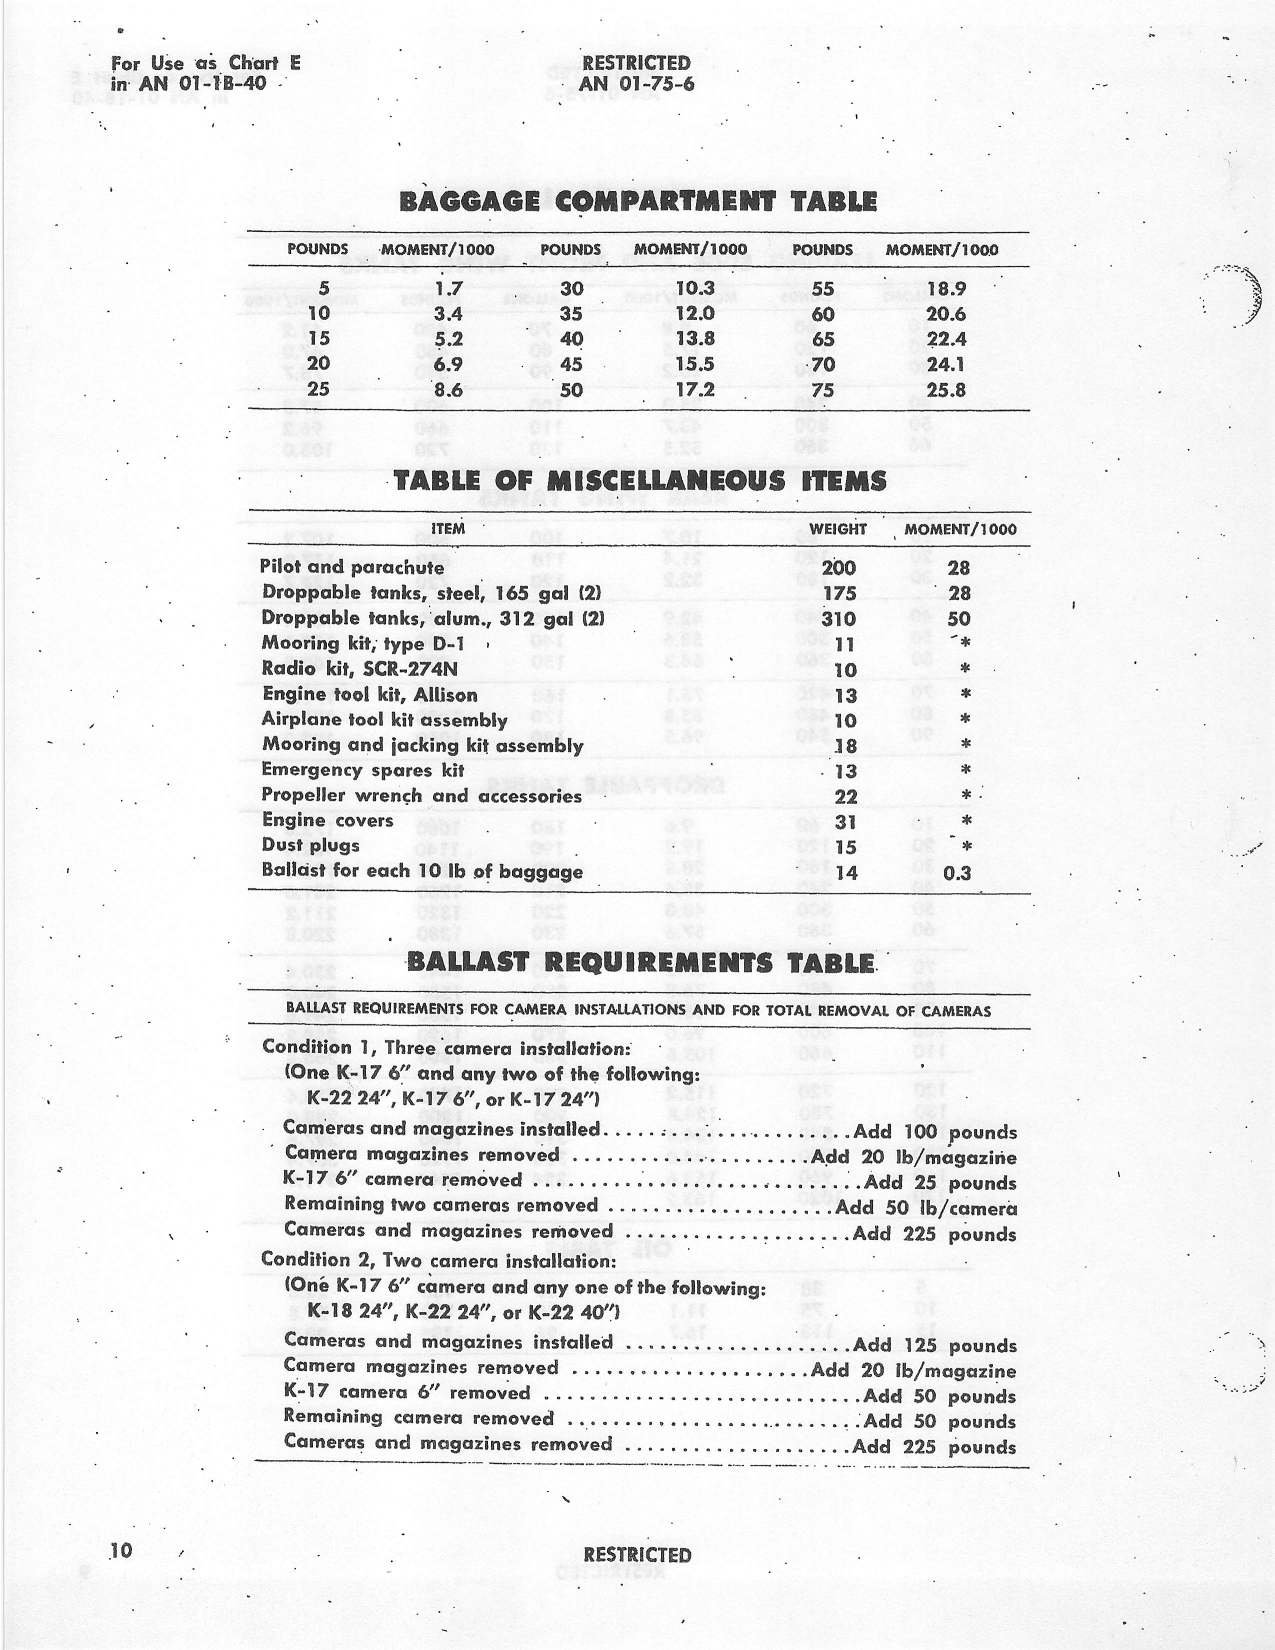 Sample page 28 from AirCorps Library document: Basic Weight Check List and Loading Data - P-38